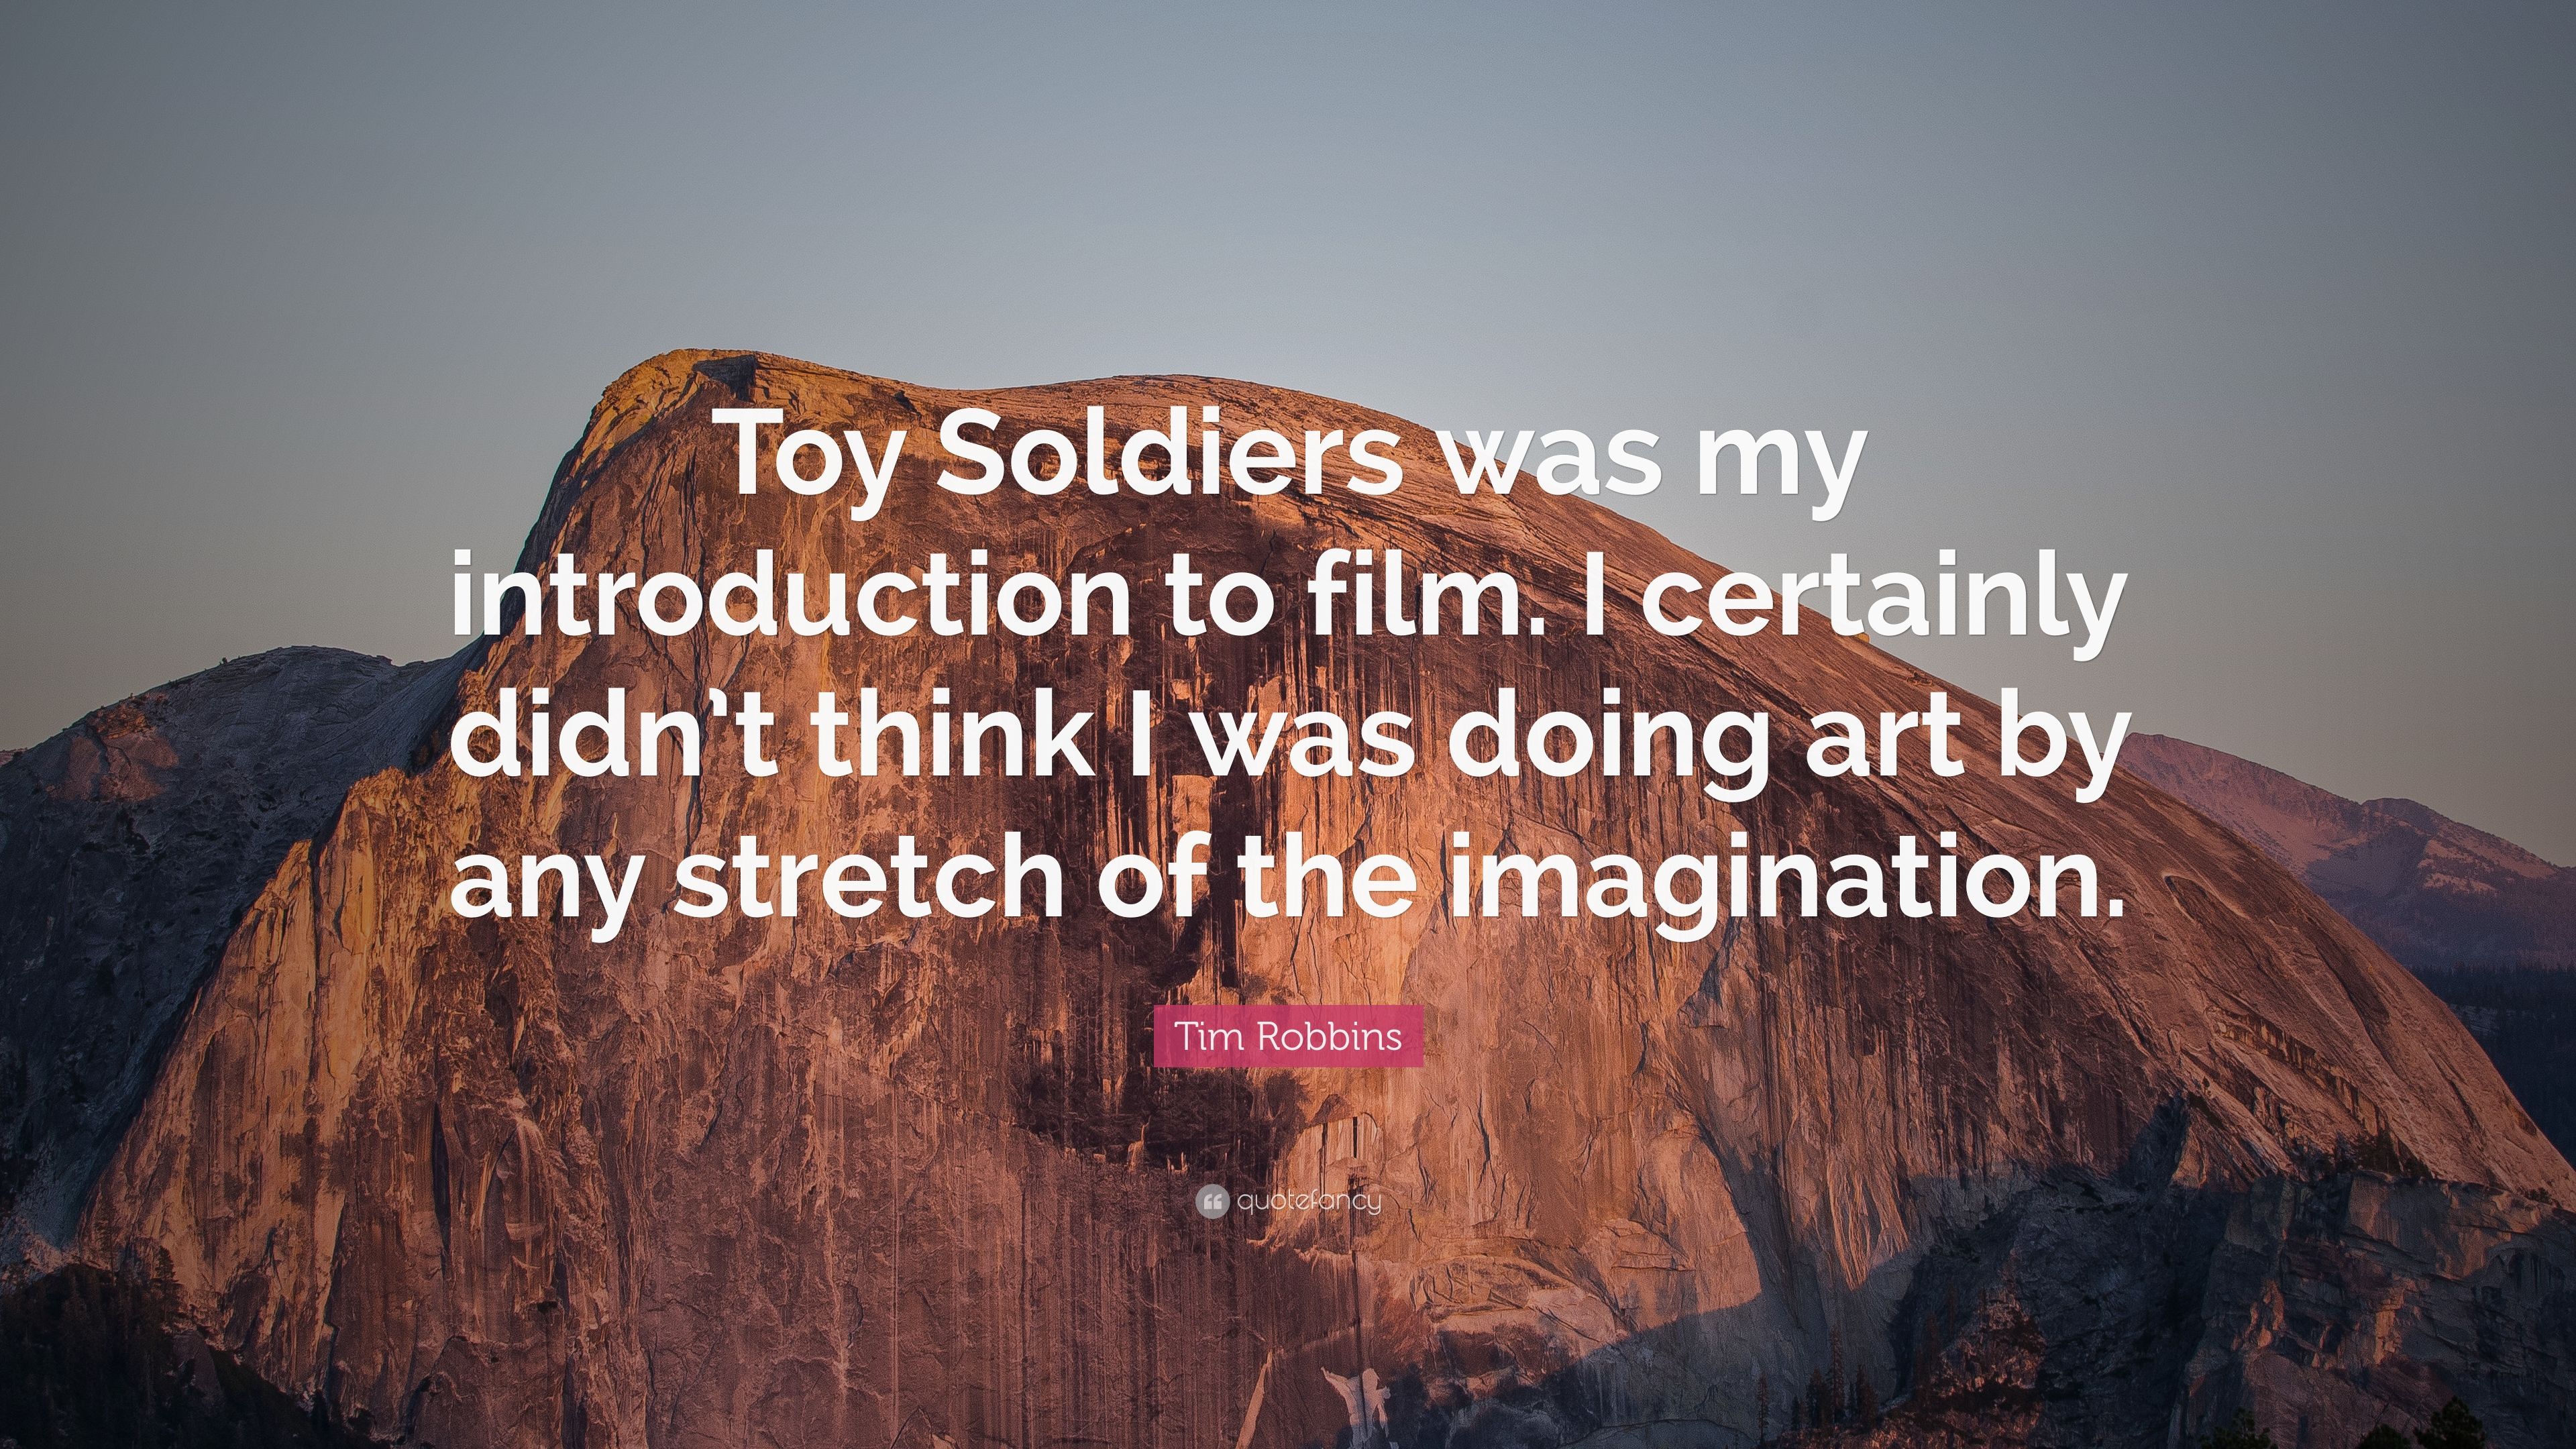 Tim Robbins Quote: “Toy Soldiers was my introduction to film